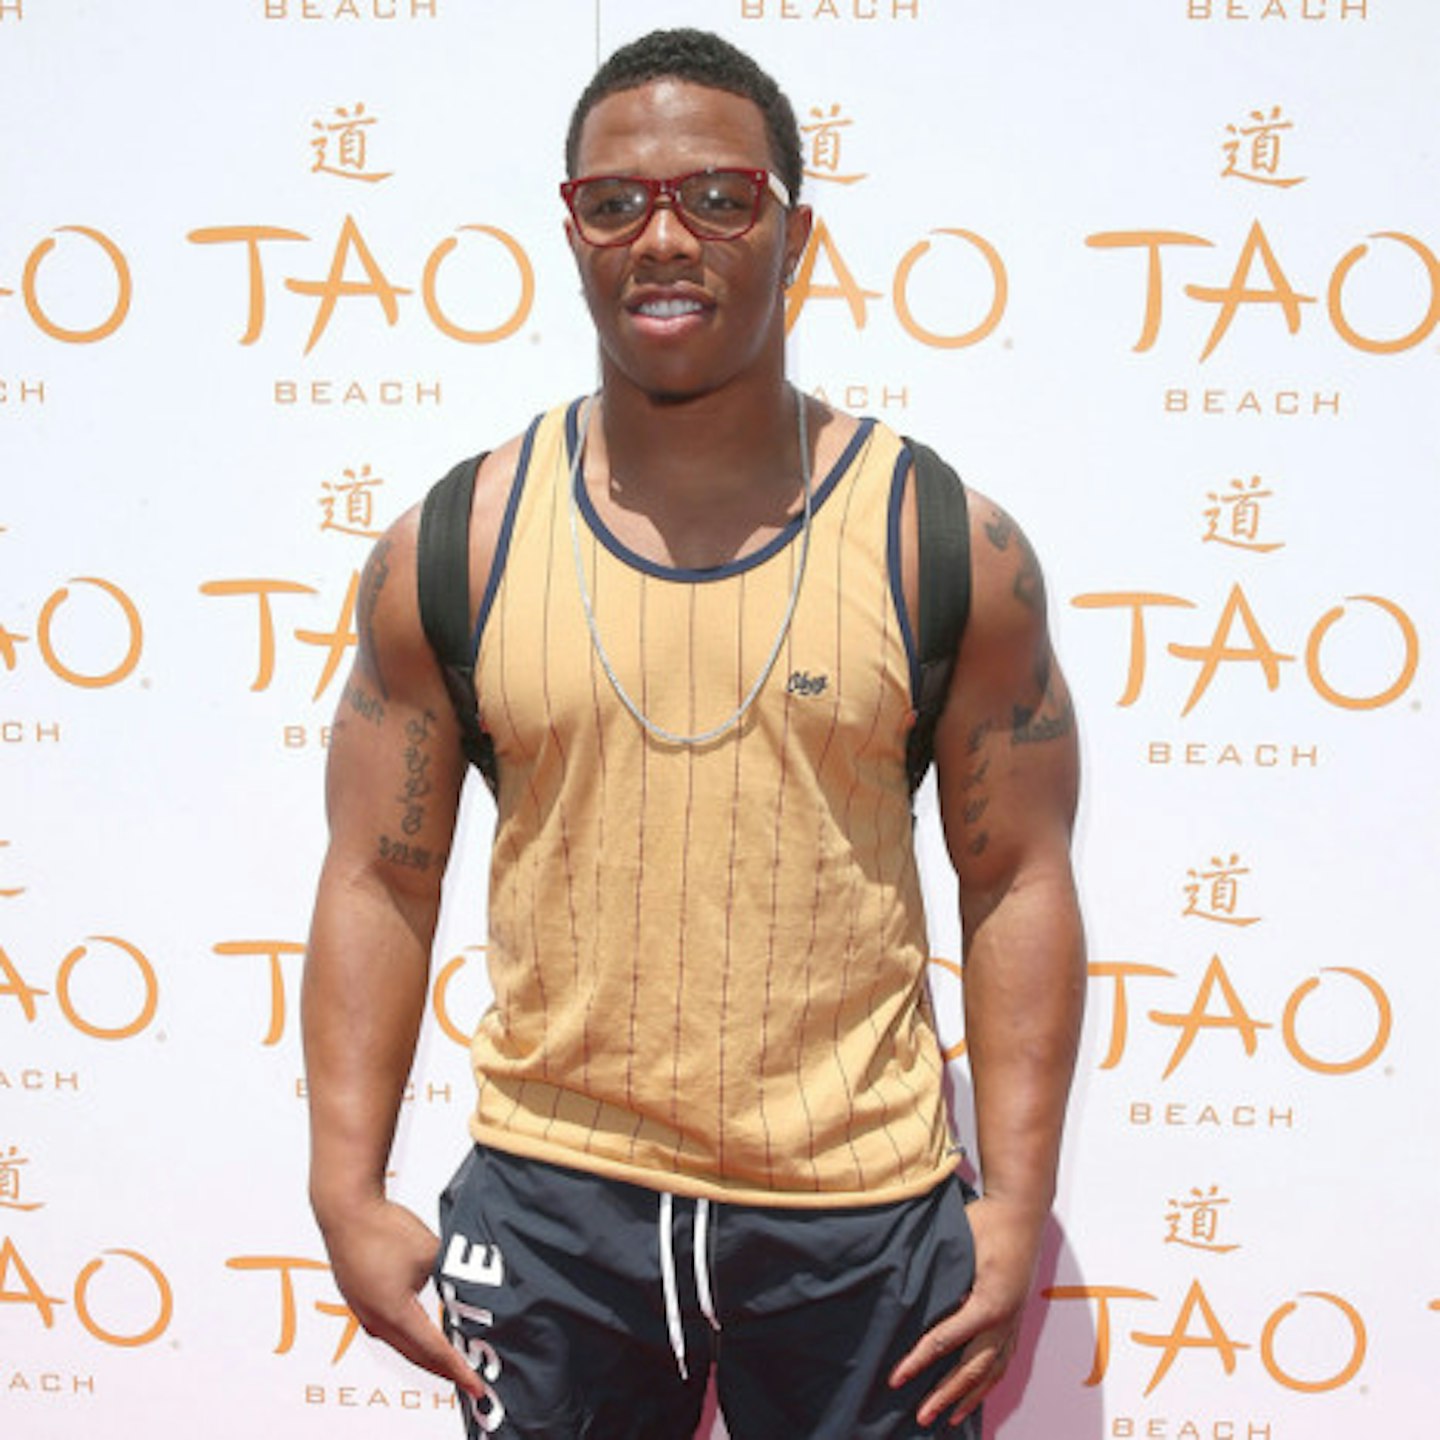 Ray Rice lost a $40 million contract this week after footage leaked of him attacking his partner